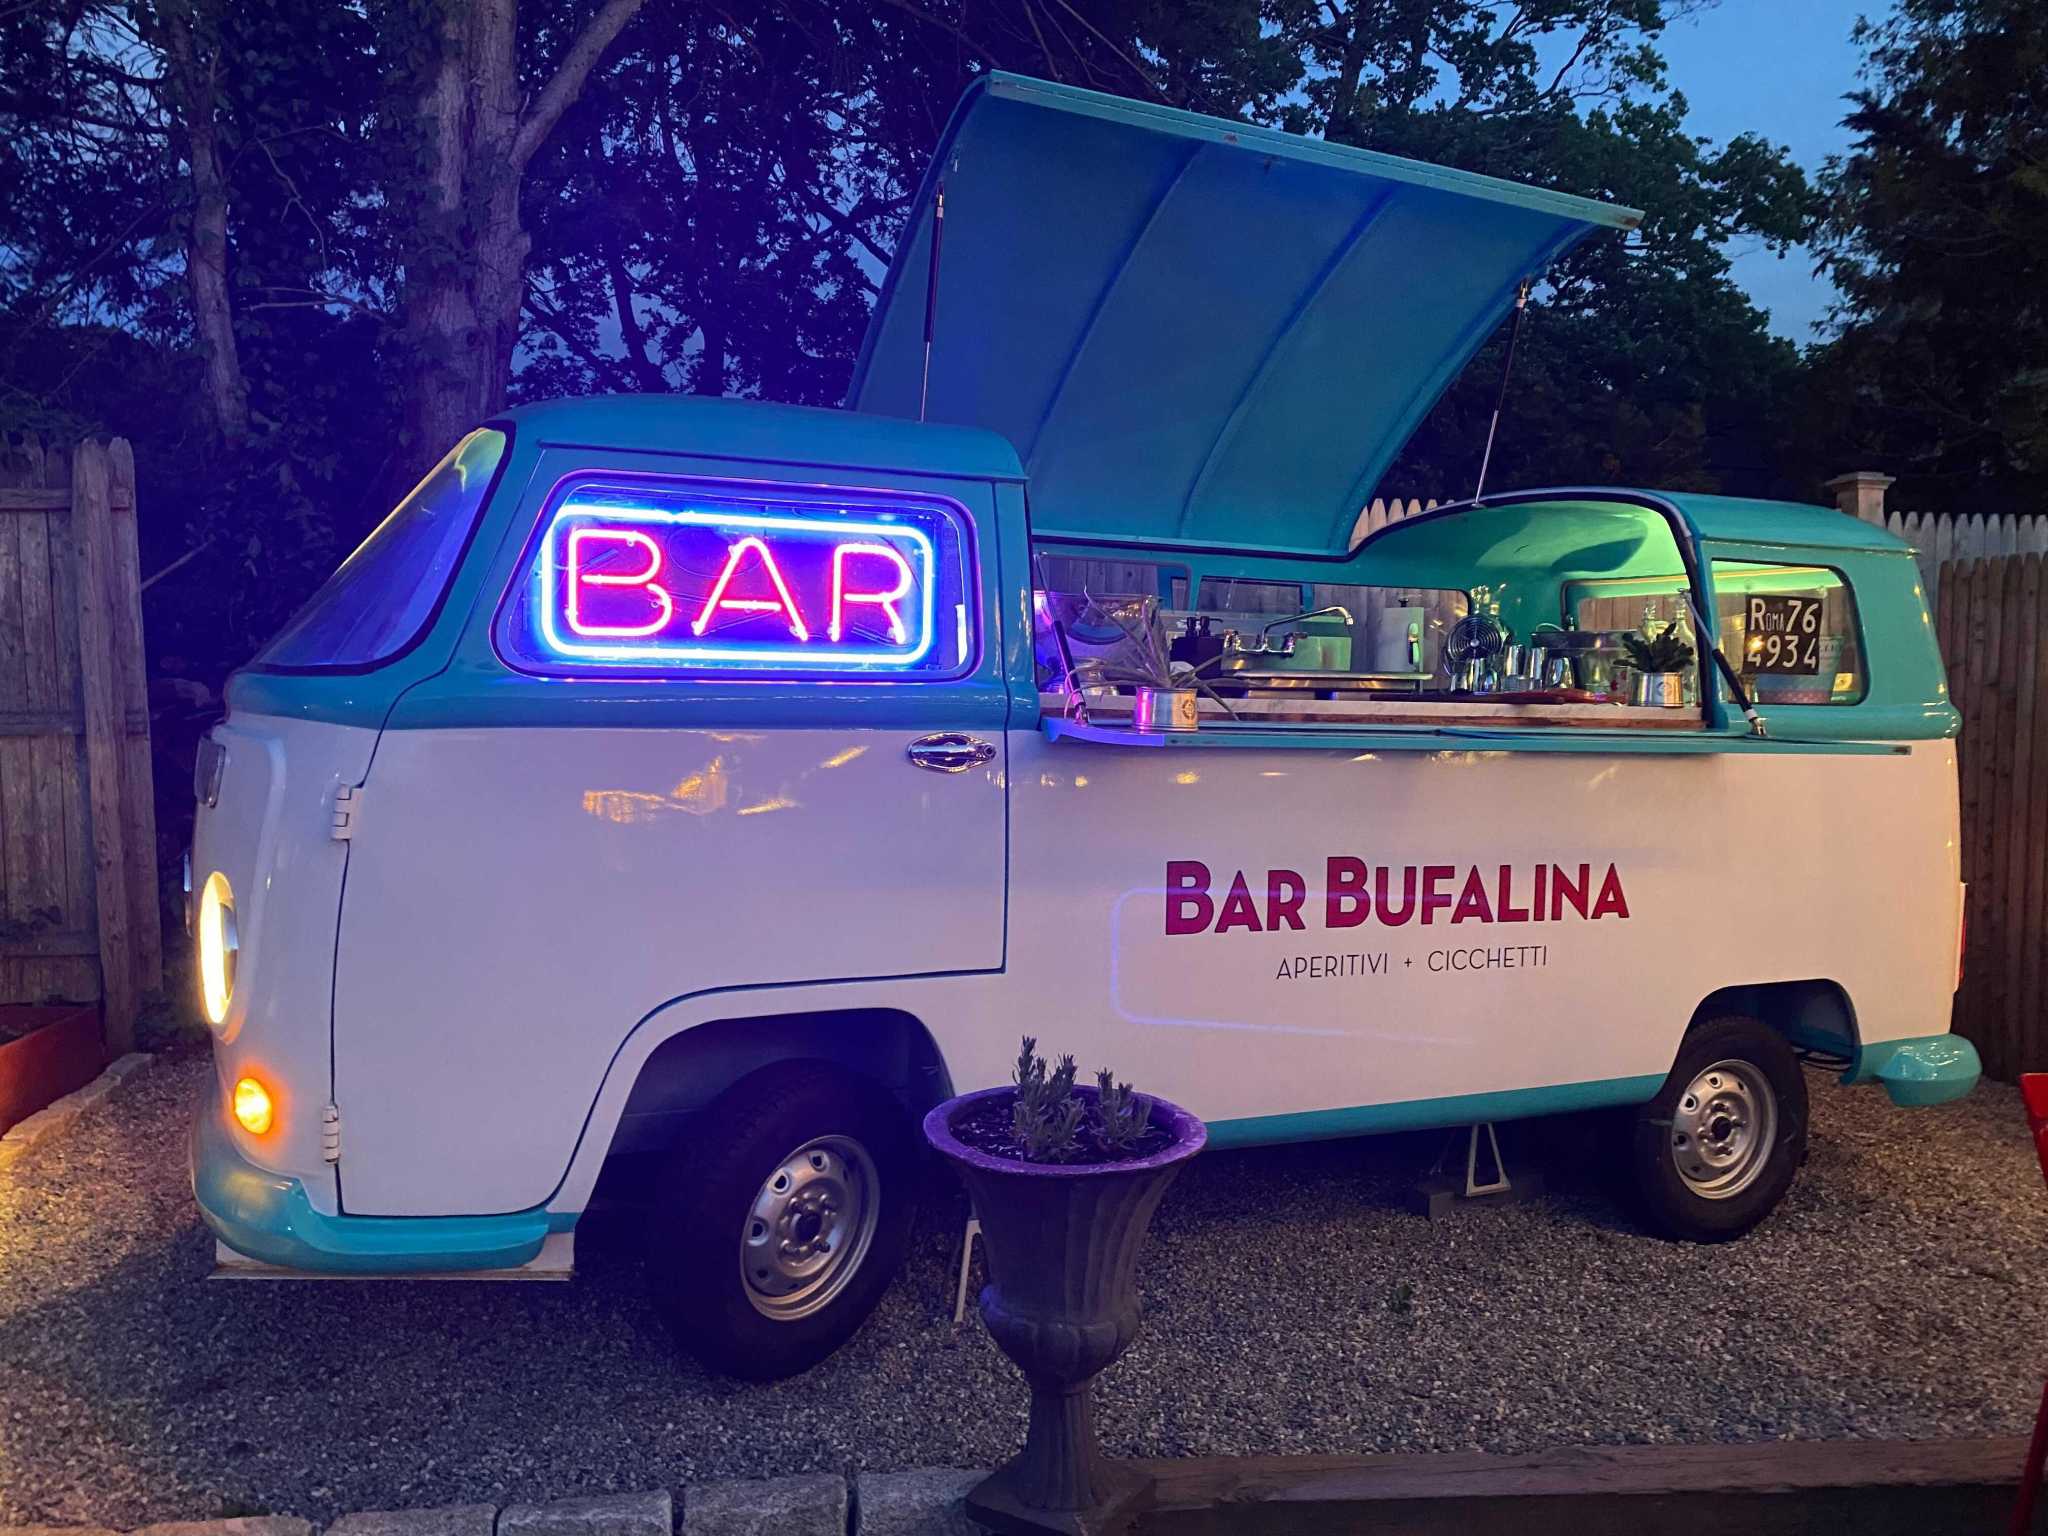 Bufalina in Guilford converts old VW bus into a mobile bar